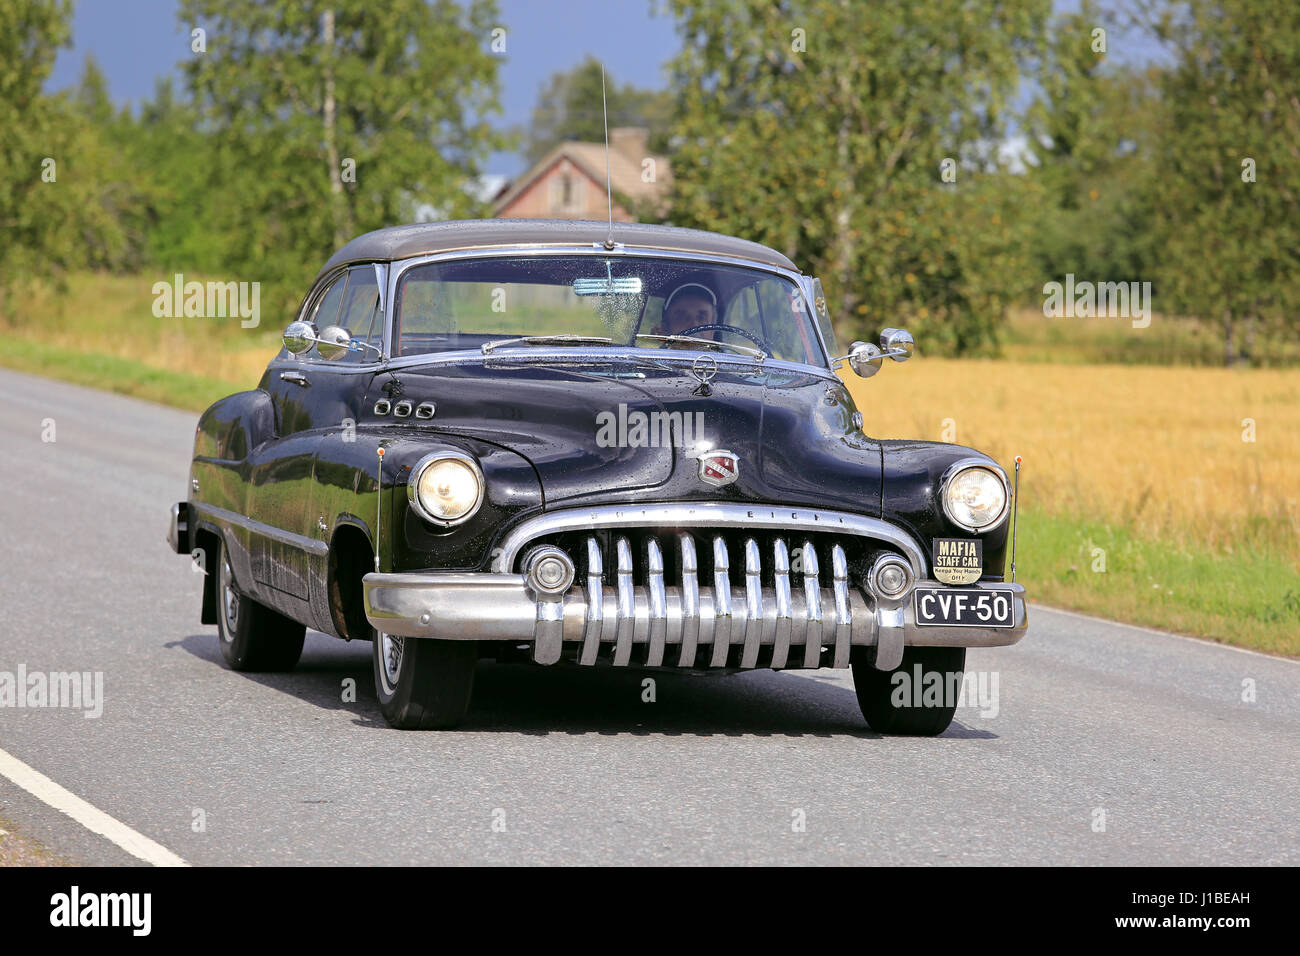 SOMERO, FINLAND - AUGUST 6, 2016: Black Buick Super Eight classic car takes part in the 90 km Maisemaruise 2016 drive along scenic roads of Tawastia P Stock Photo